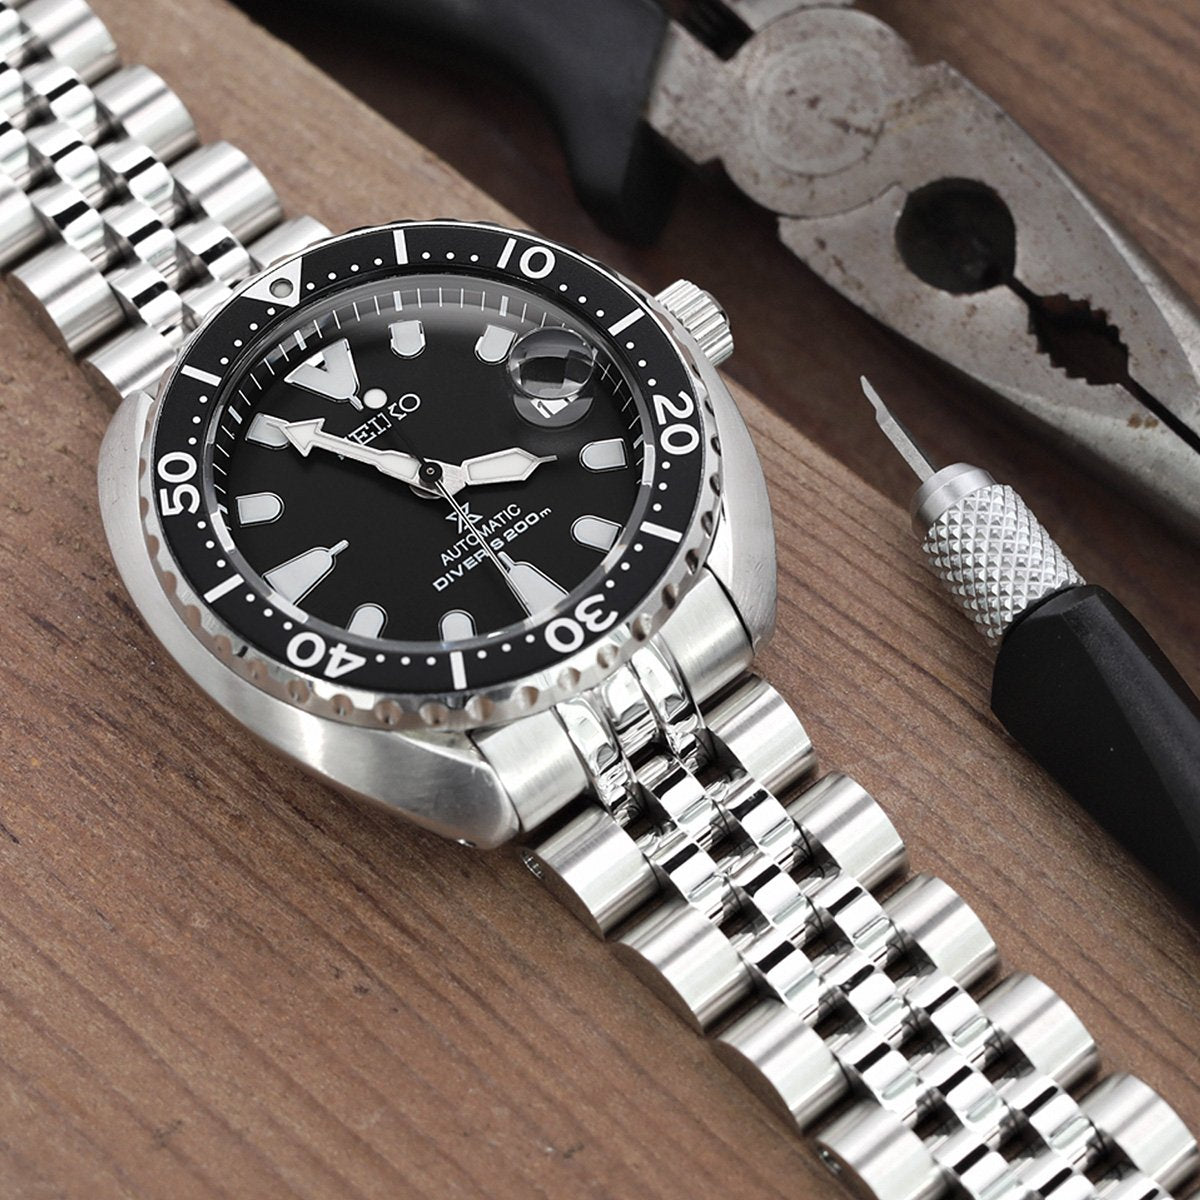 Seiko Mini-Turtle Prospex Automatic Dive Watch with Black Dial SRPC35K1 Strapcode Watch Bands